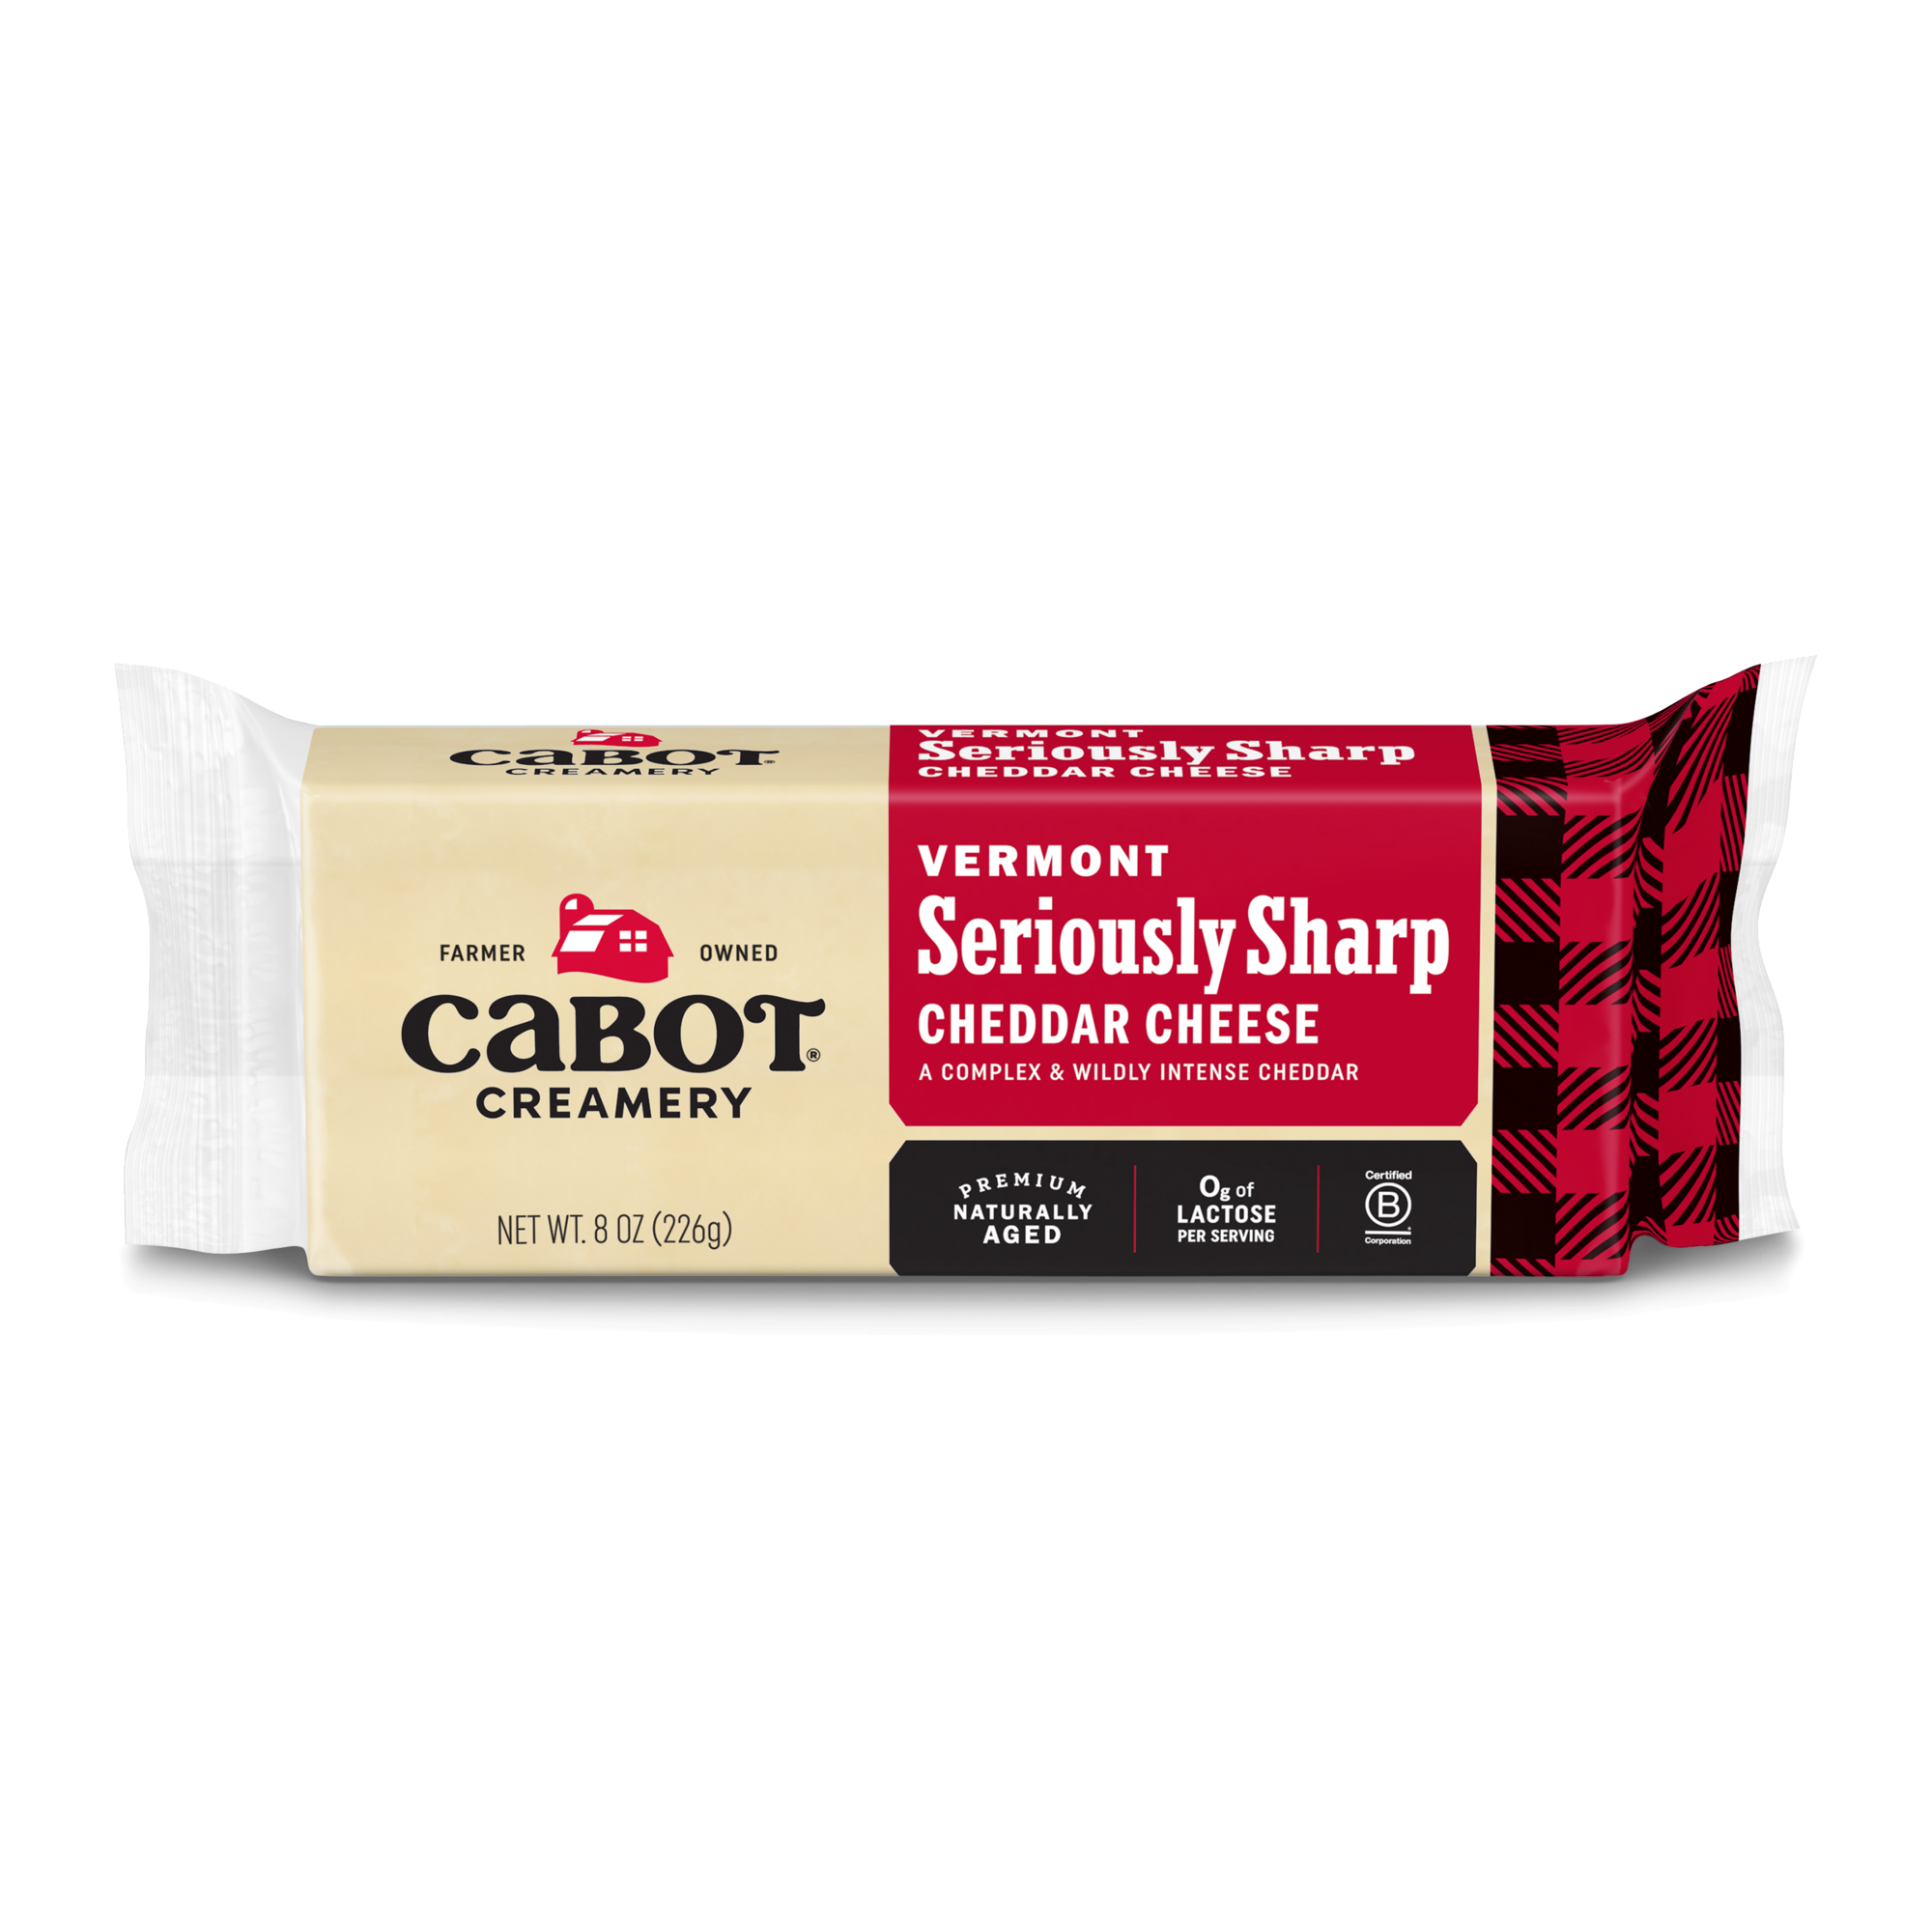 Cabot Seriously Sharp White Cheddar Cheeses Bar 8oz 12ct